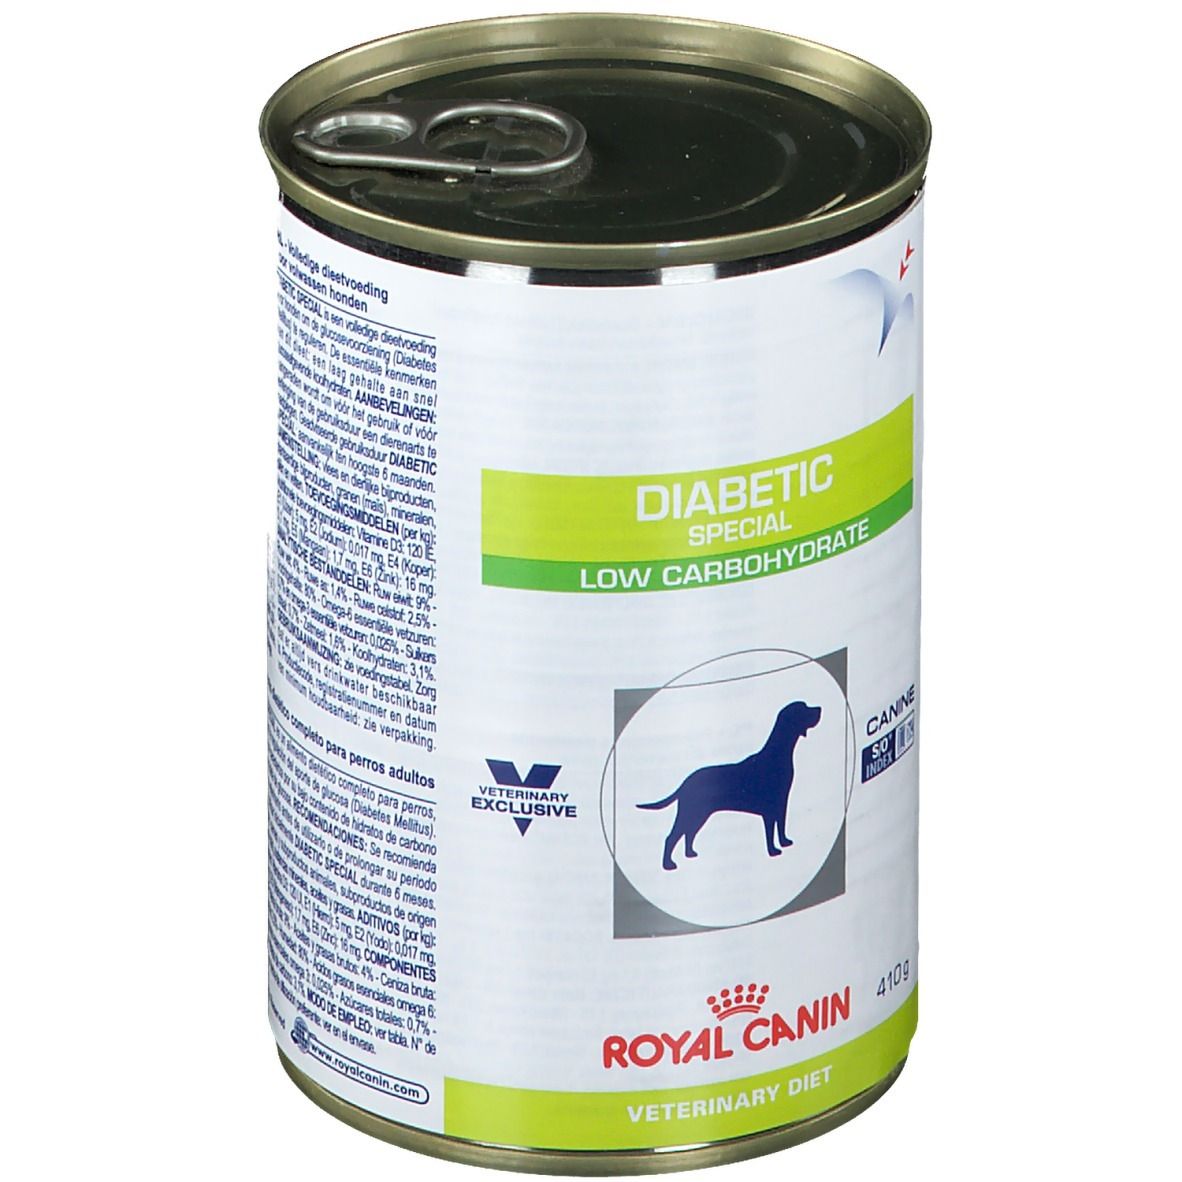 Royal Canin Diabetic Special Low Carbohydrate Canine